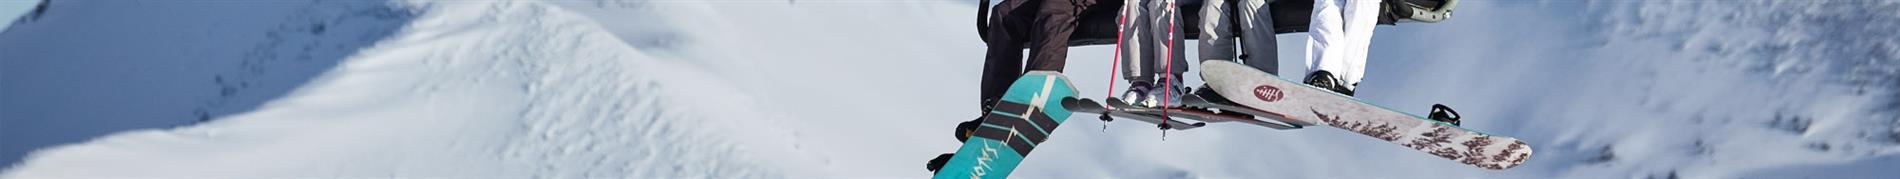 Atomic Women's skis, snowboards, and accessories for everything snow. 